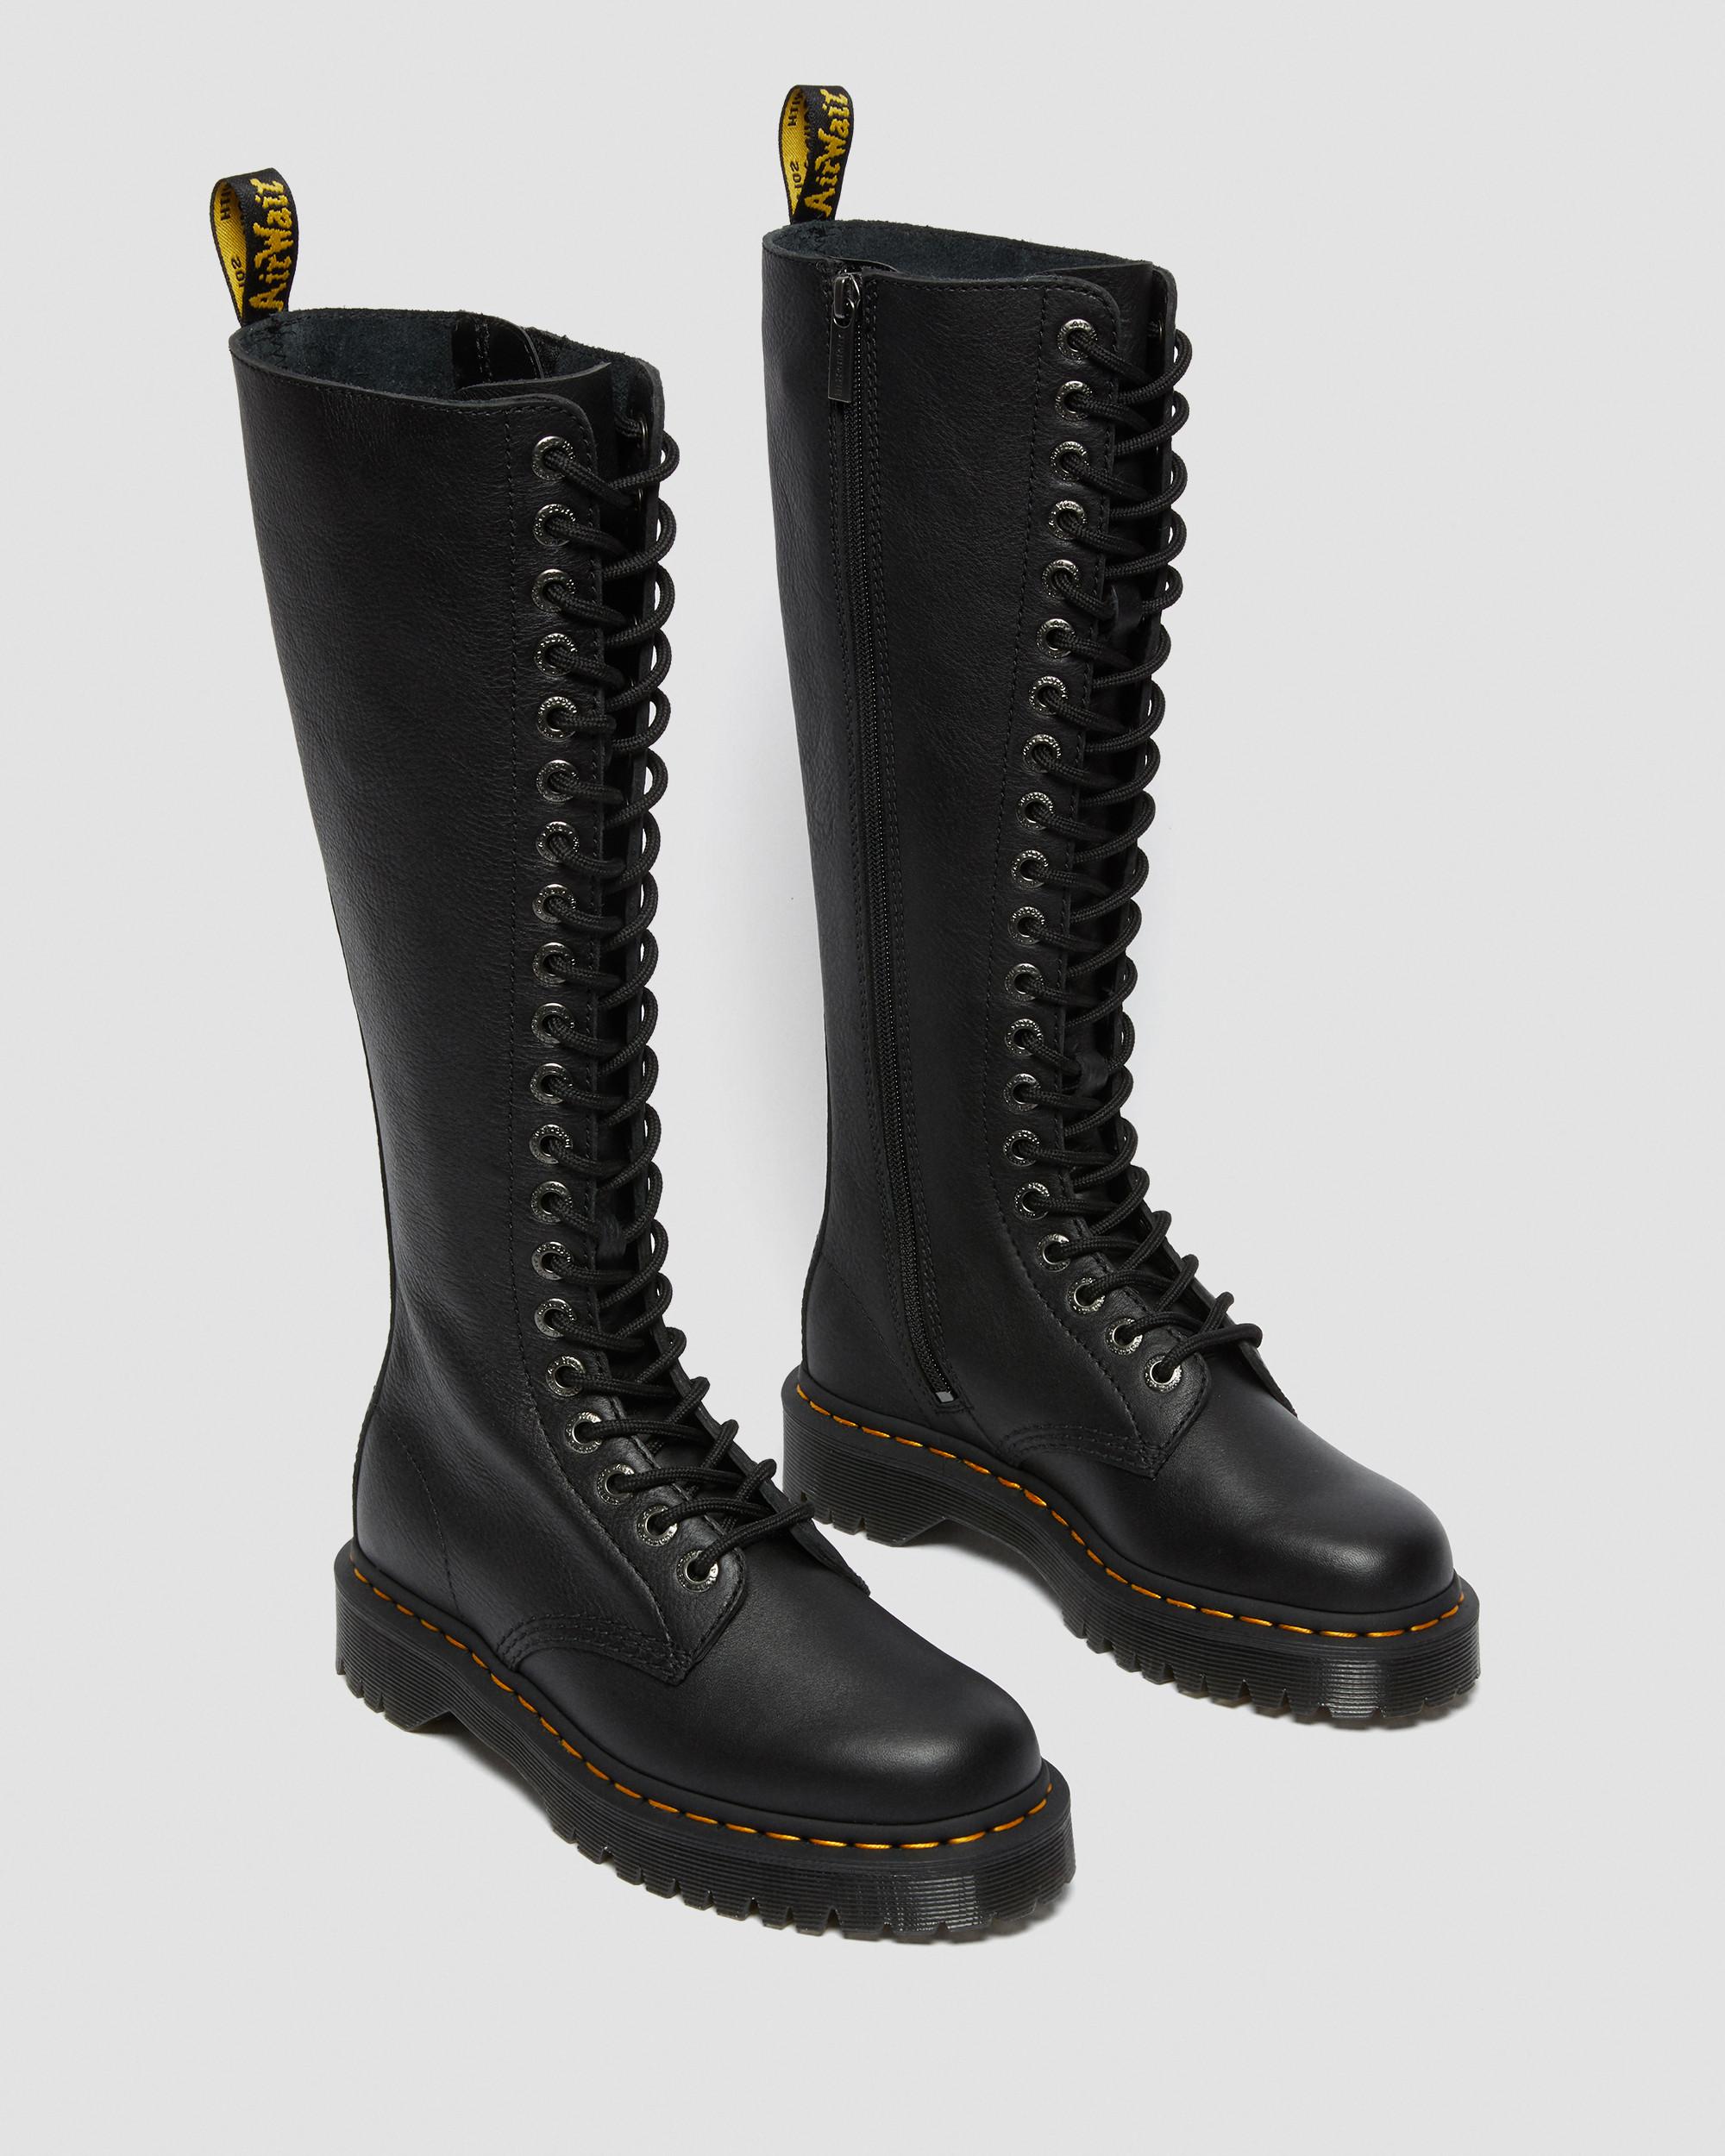 1B60 Bex Leather Extra High Boots | Dr 